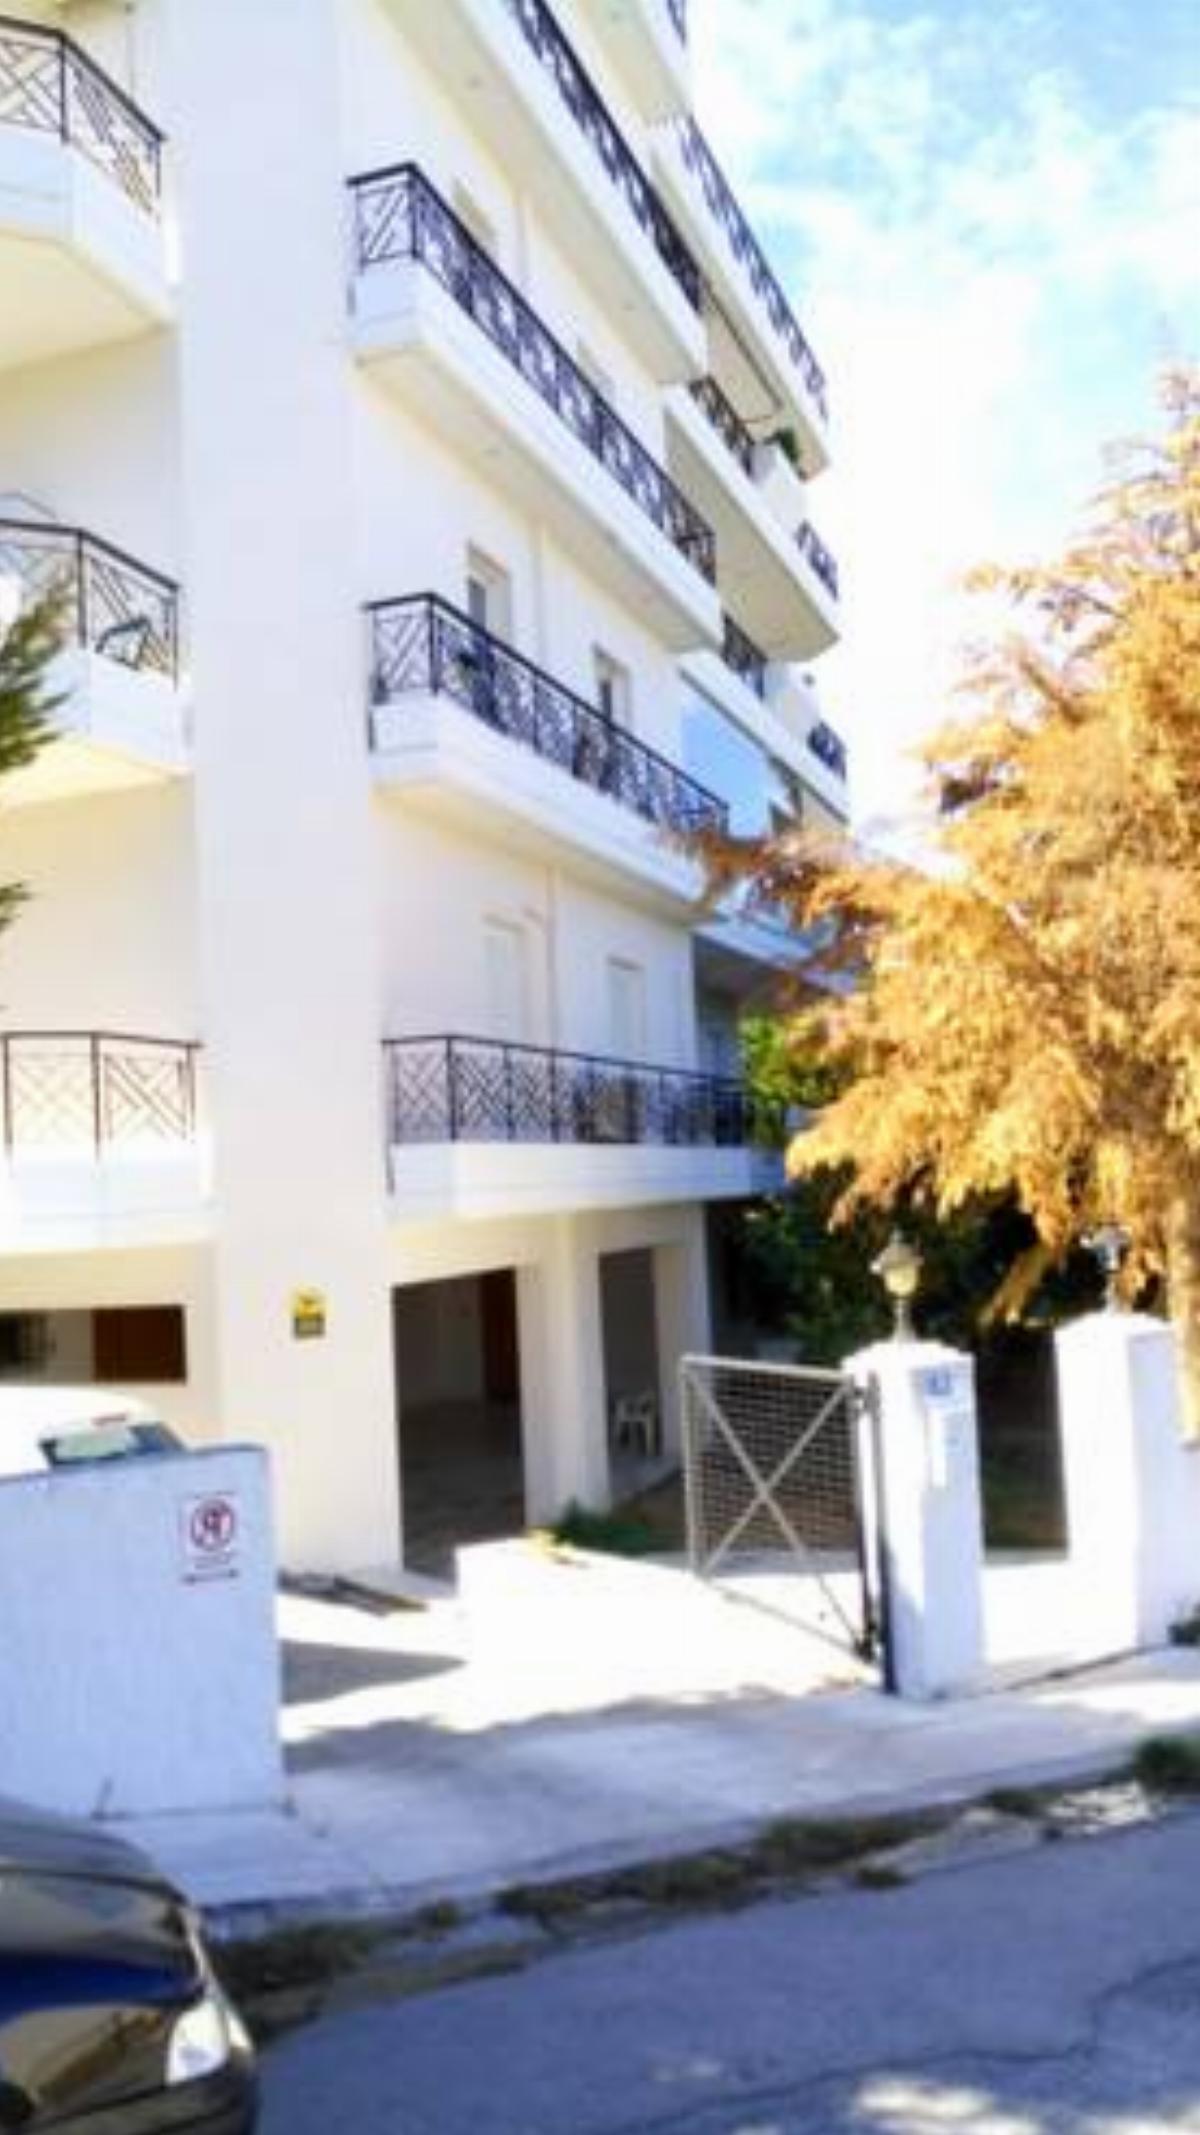 Lux Airport Apartment Hotel Athens Greece